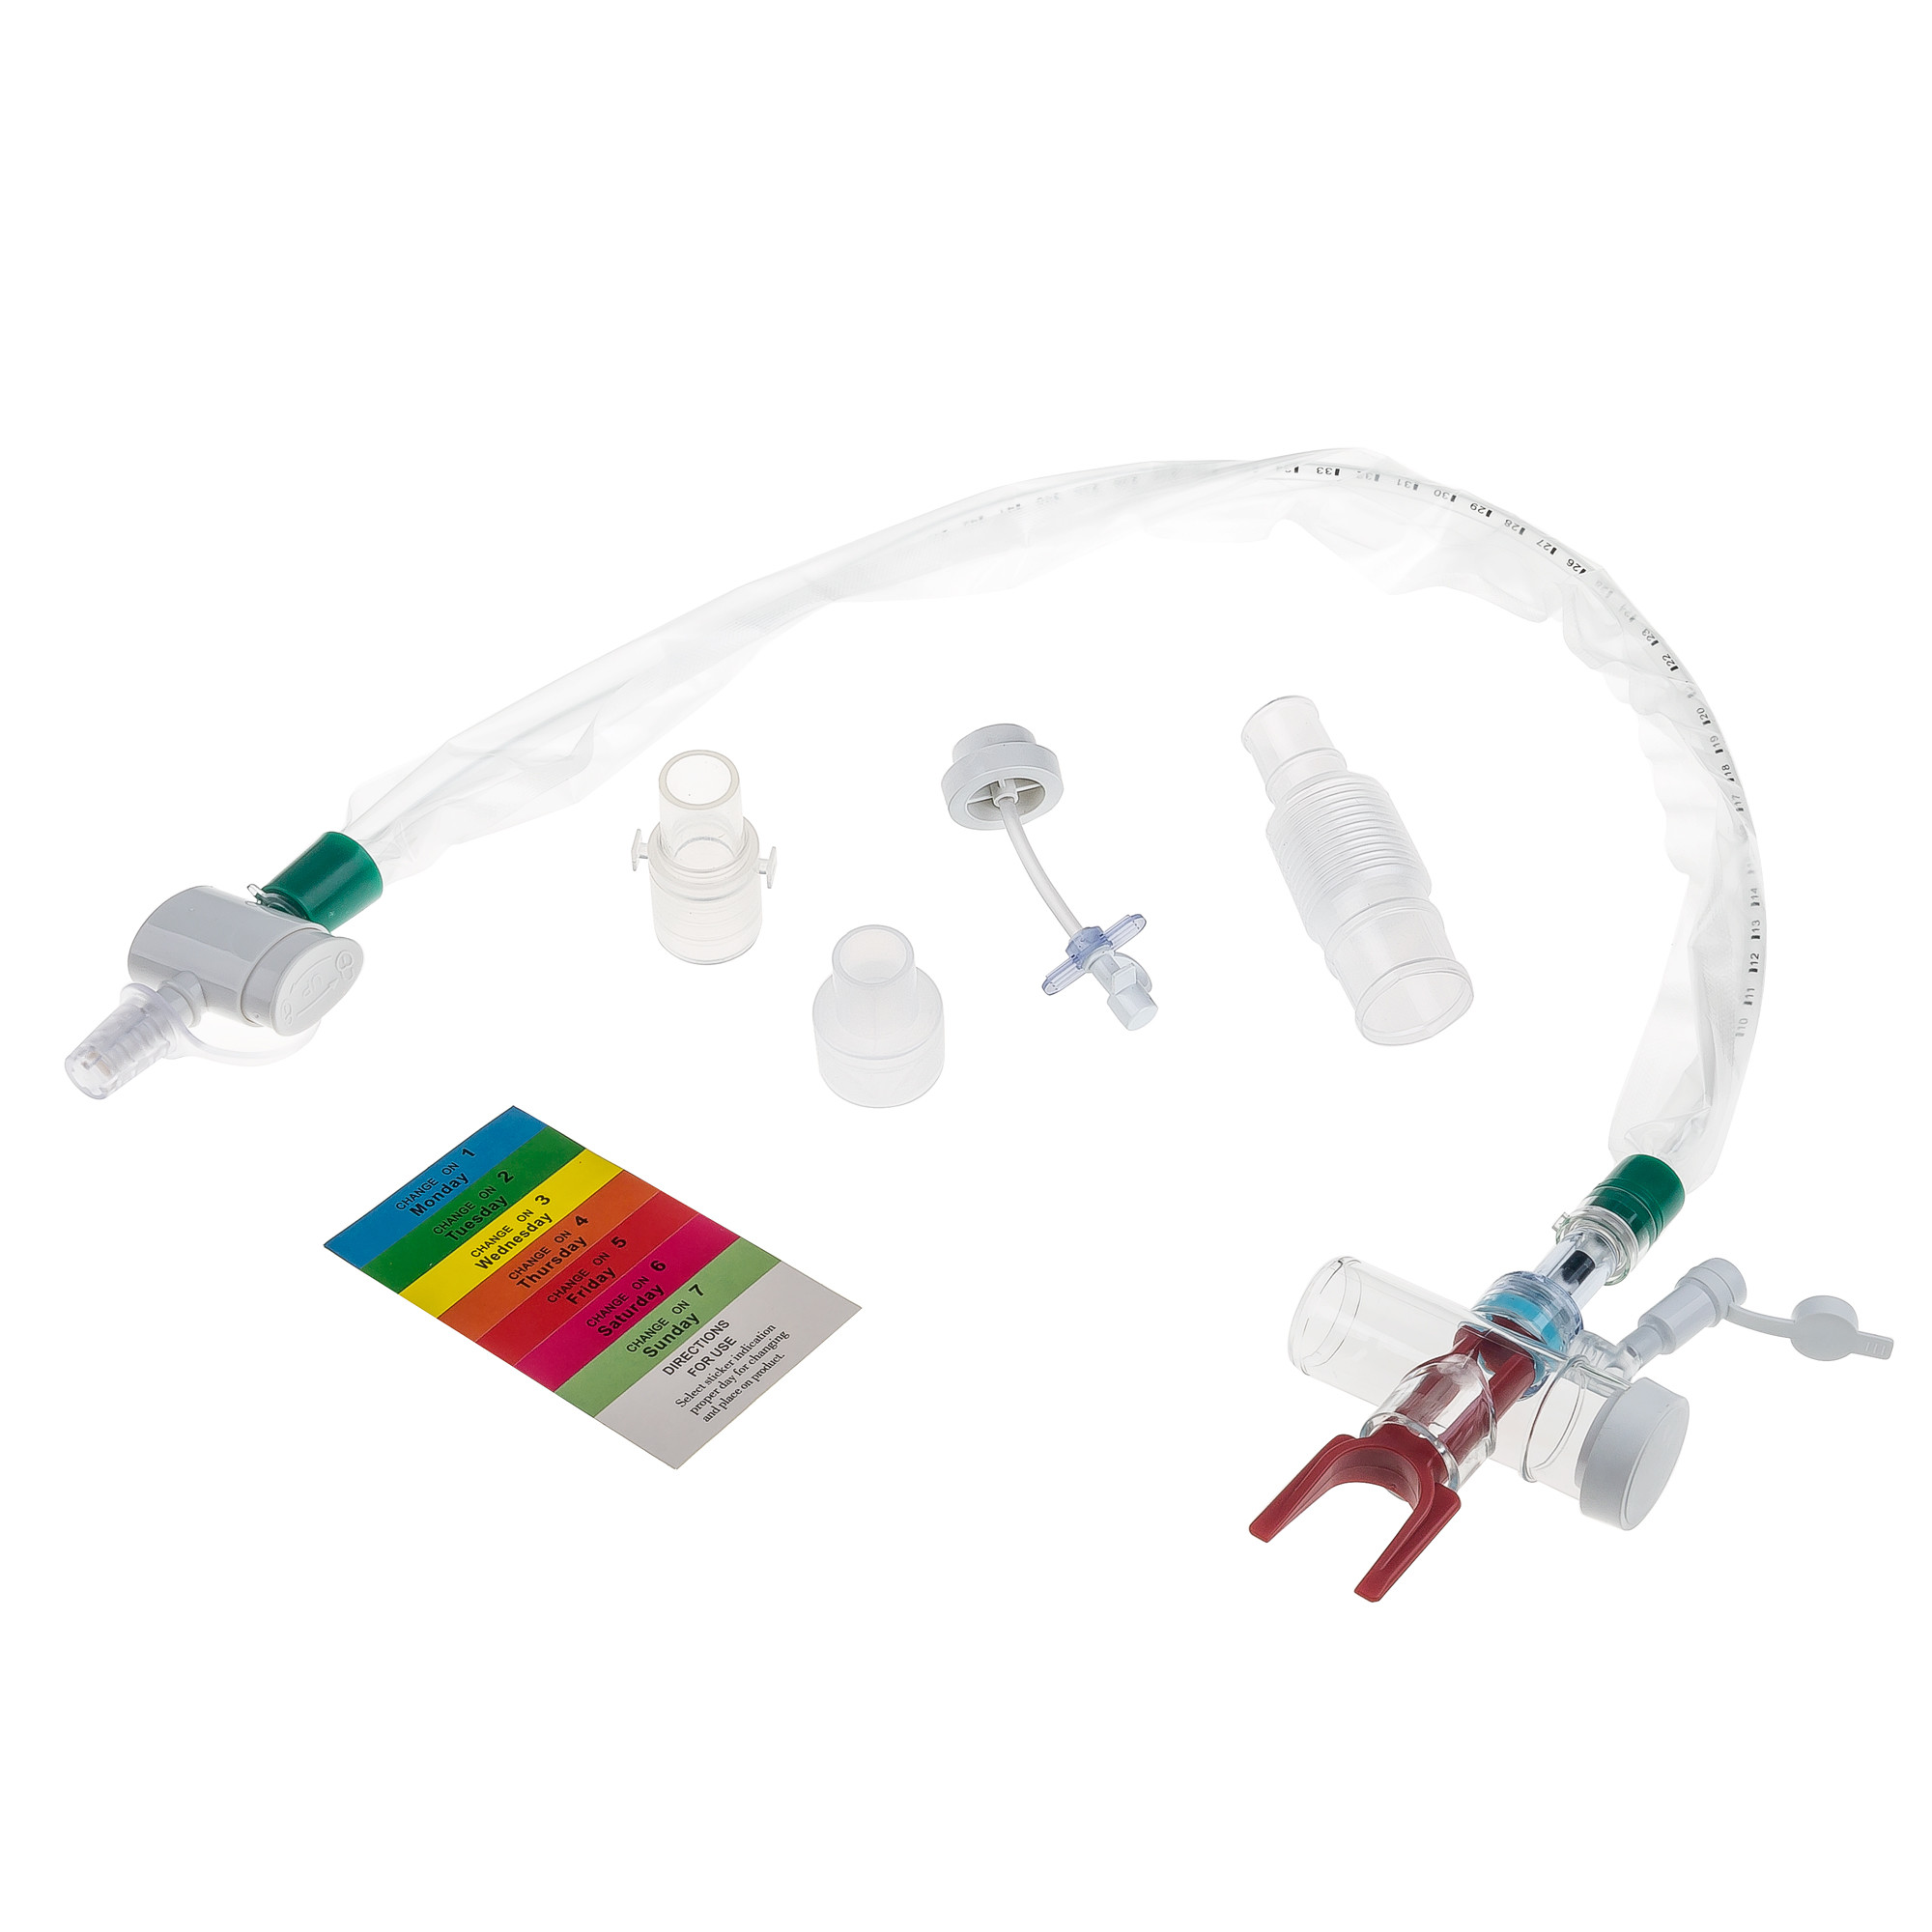  600mm Length 14Fr Trach Suction Catheter In Line Suction Catheter PVC Material Manufactures